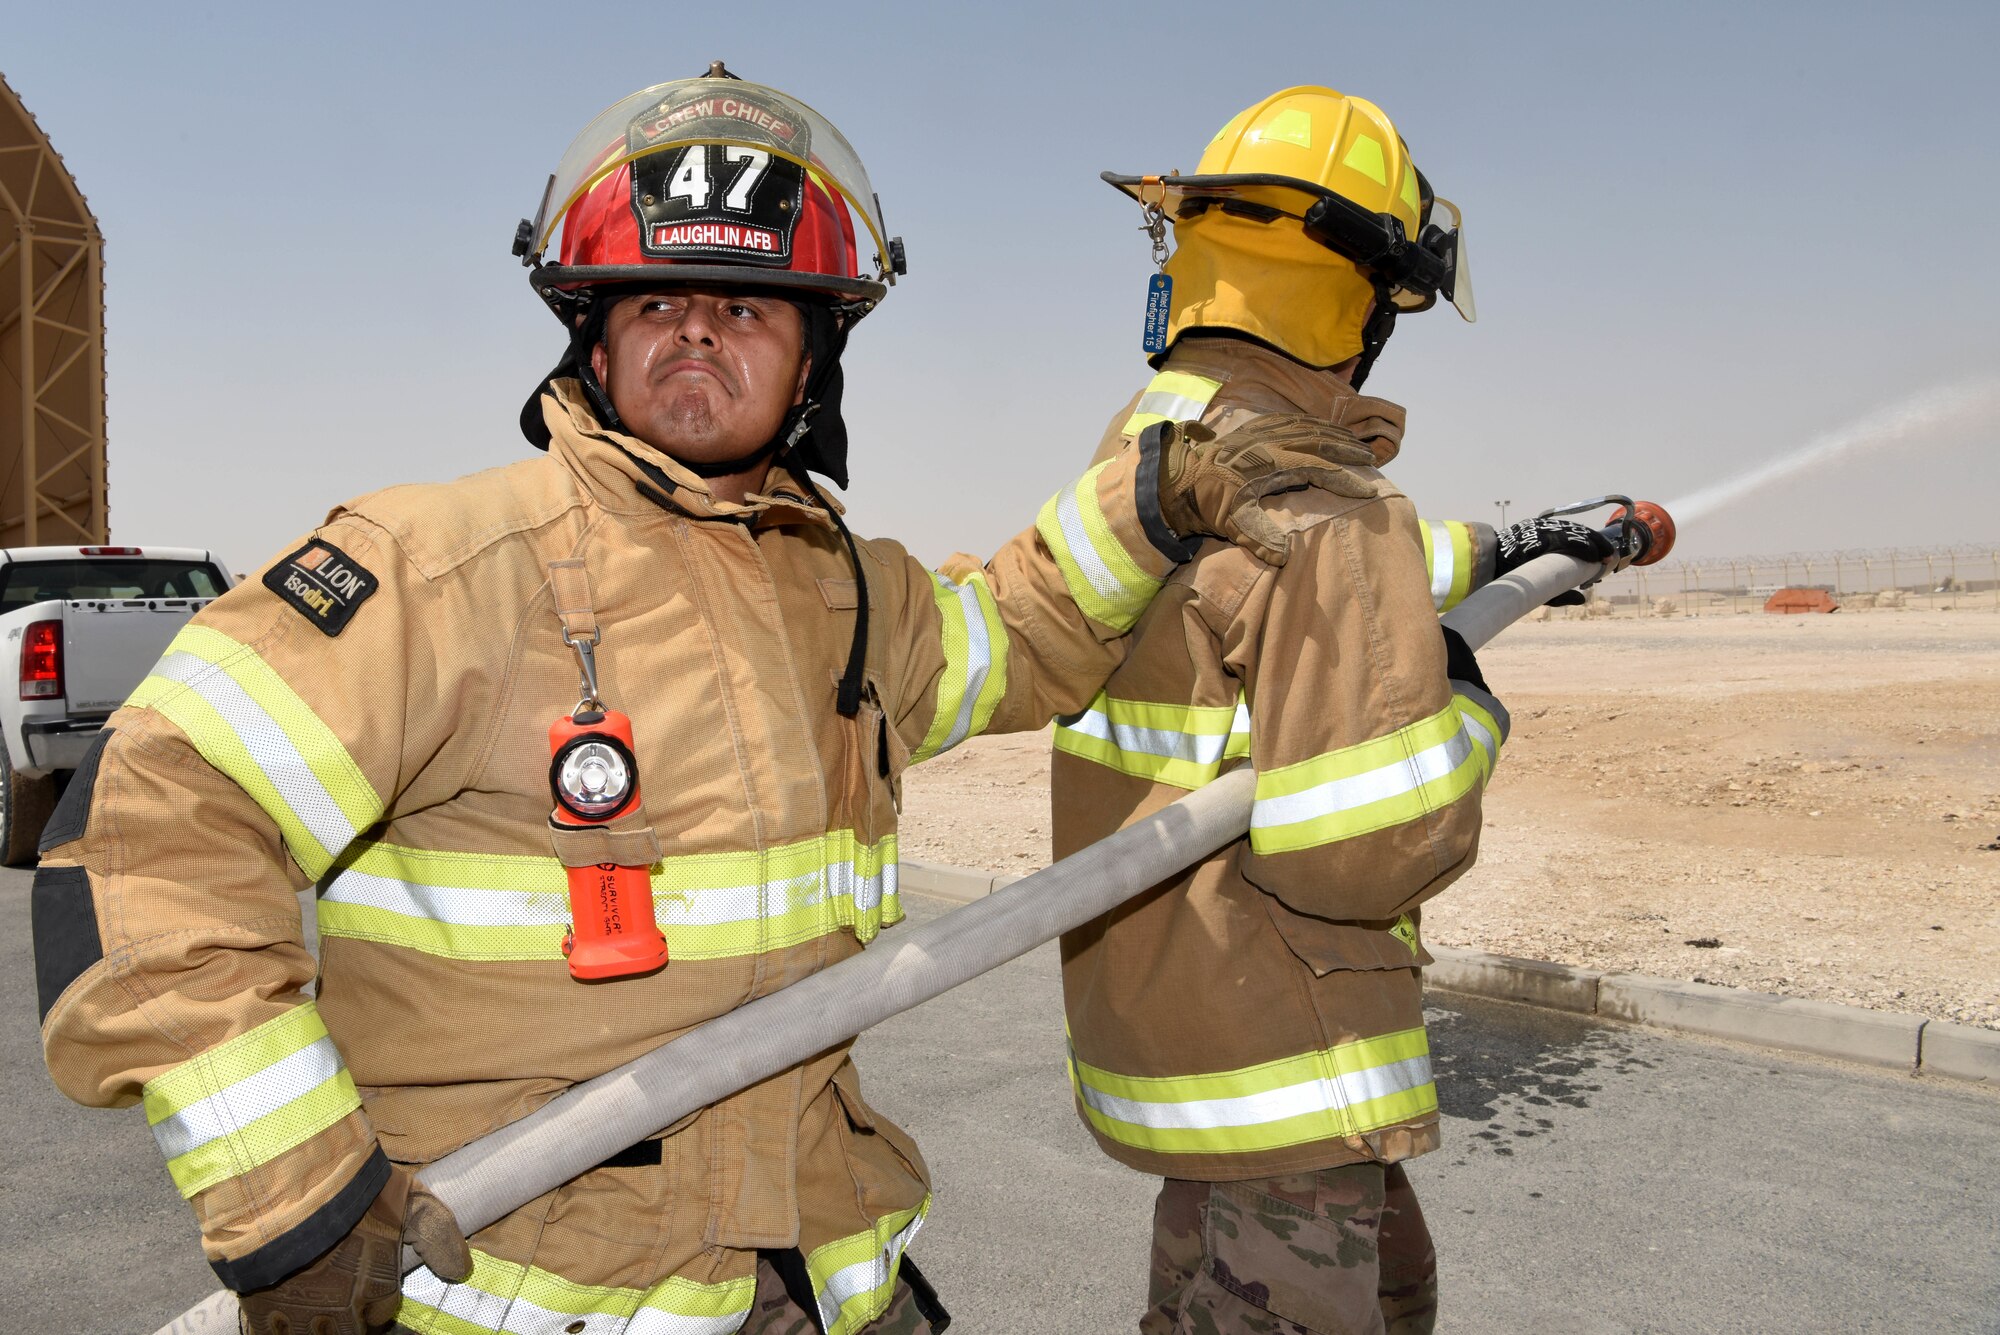 Tech. Sgt. Eduardo Castro, 379th Expeditionary Civil Engineer Squadron station captain and Airman 1st Class Samuel Olombo, 379th ECES firefighter tests function checks a fire truck on June 6, 2019, at Al Udeid Air Base, Qatar. During the function checks they also inspect and start the truck to ensure the vehicle is ready for use.  (U.S. Air Force photo by Staff Sgt. Ashley L. Gardner)